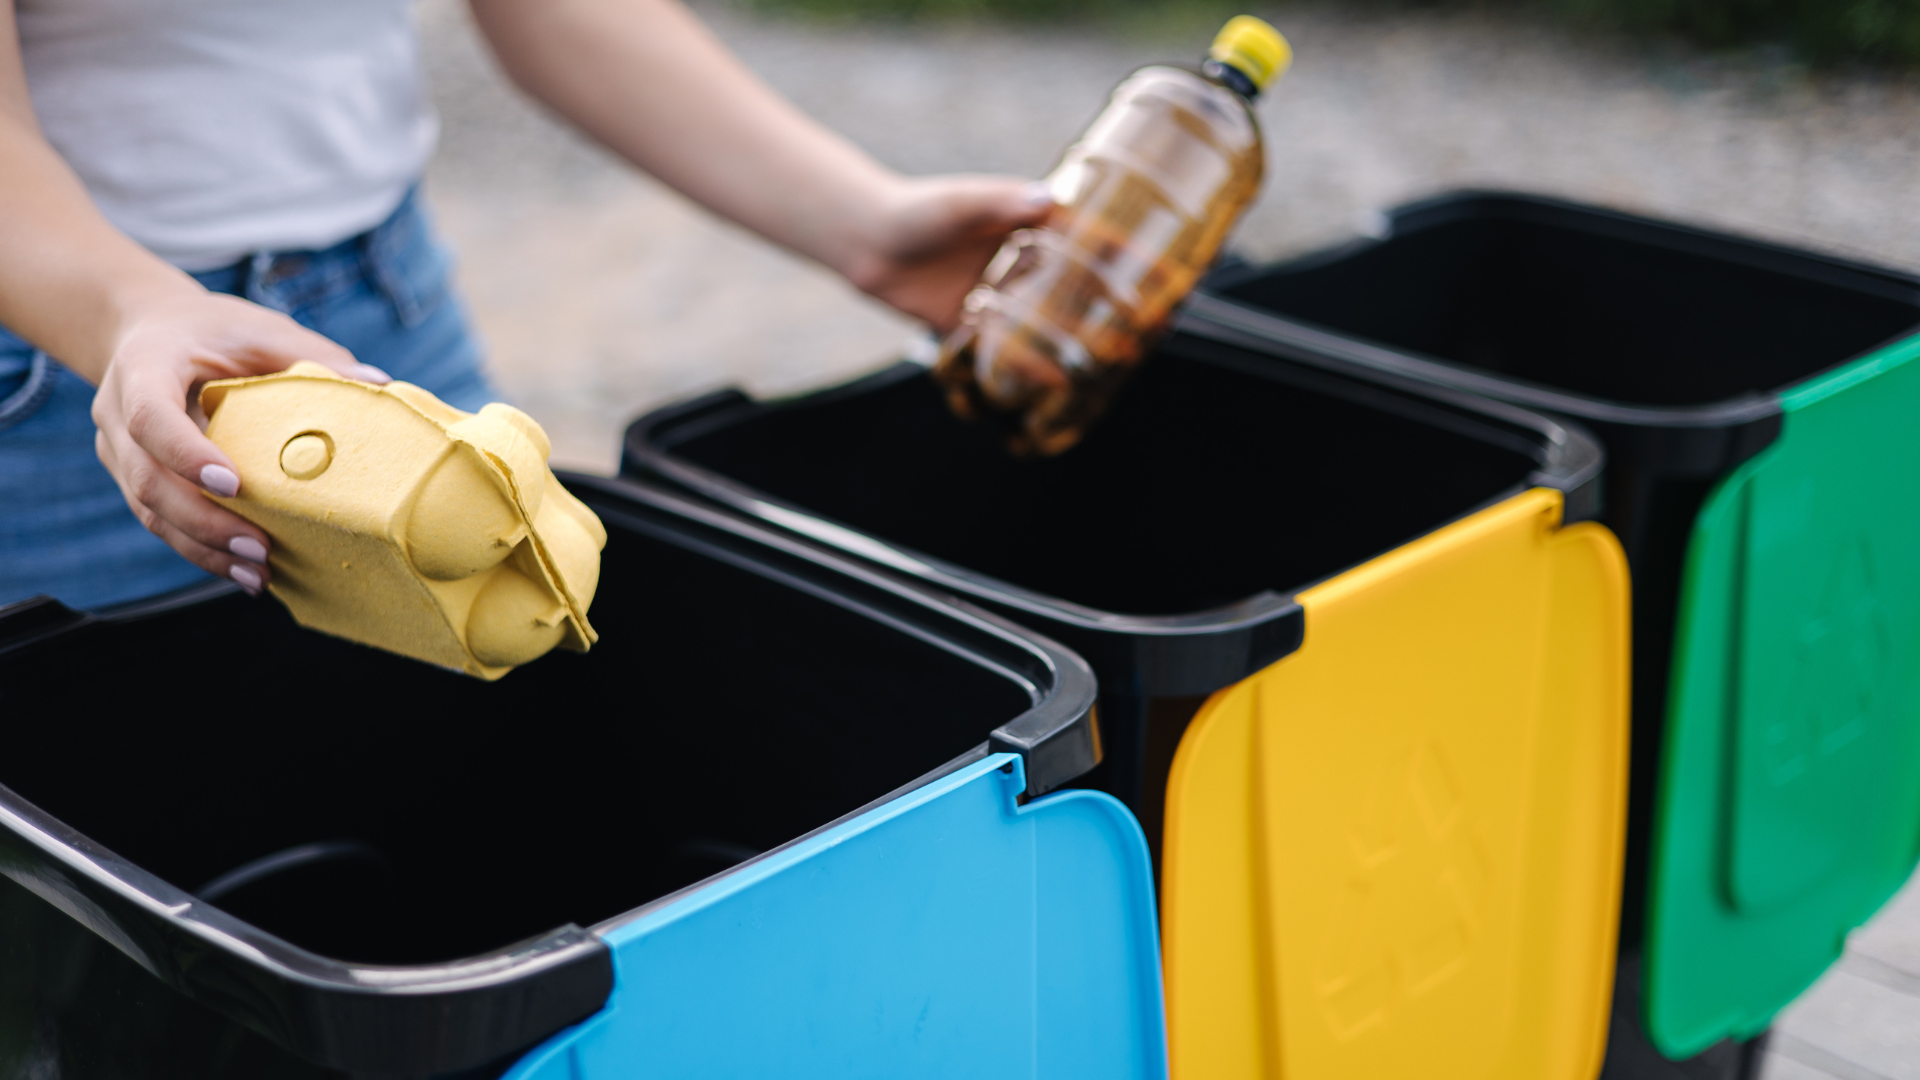 a person is putting a plastic bottle into a yellow bin